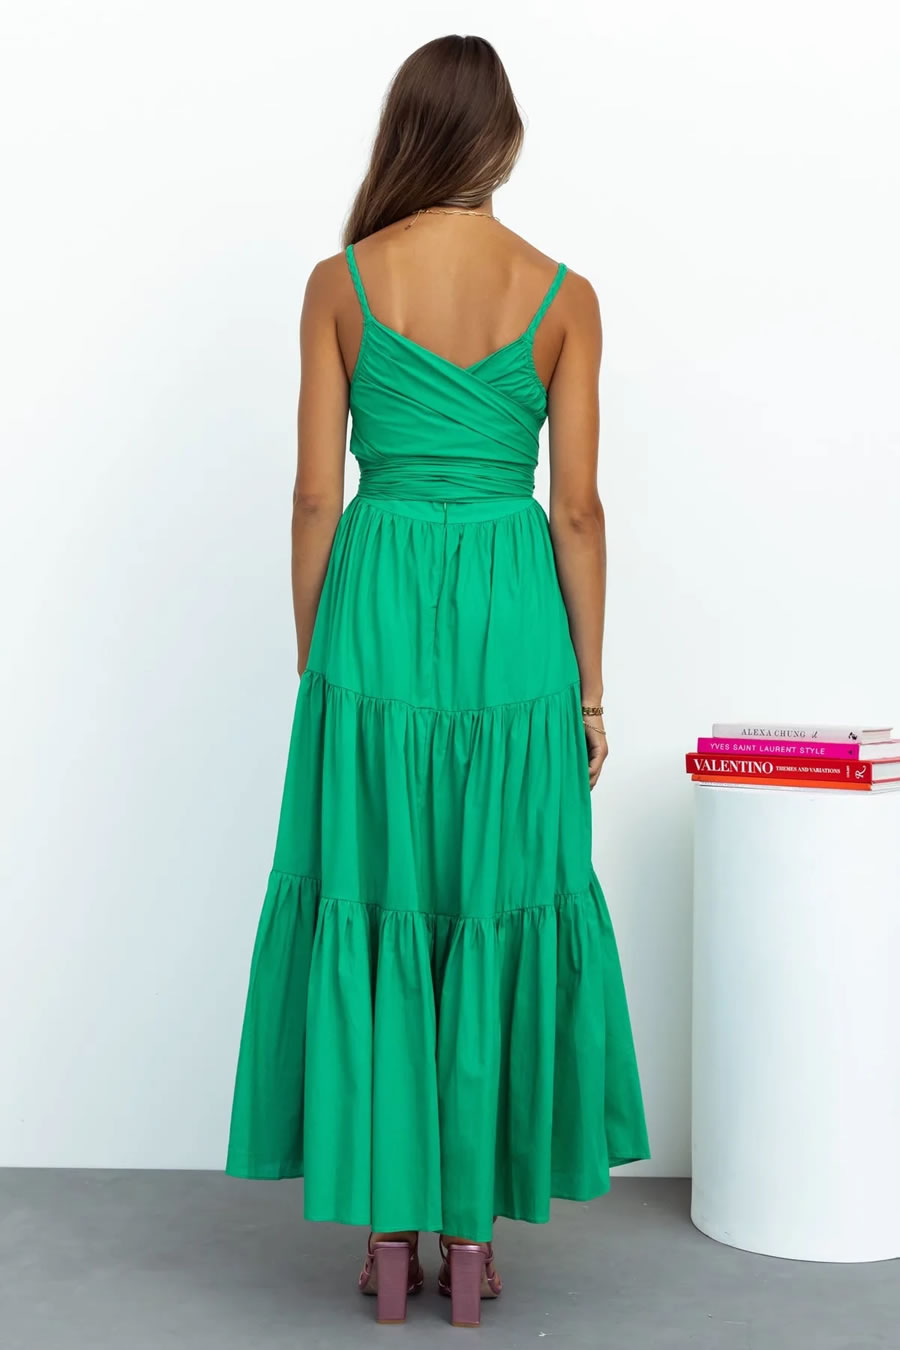 Fashion Green Woven Lace-up Suspender Skirt,Long Dress